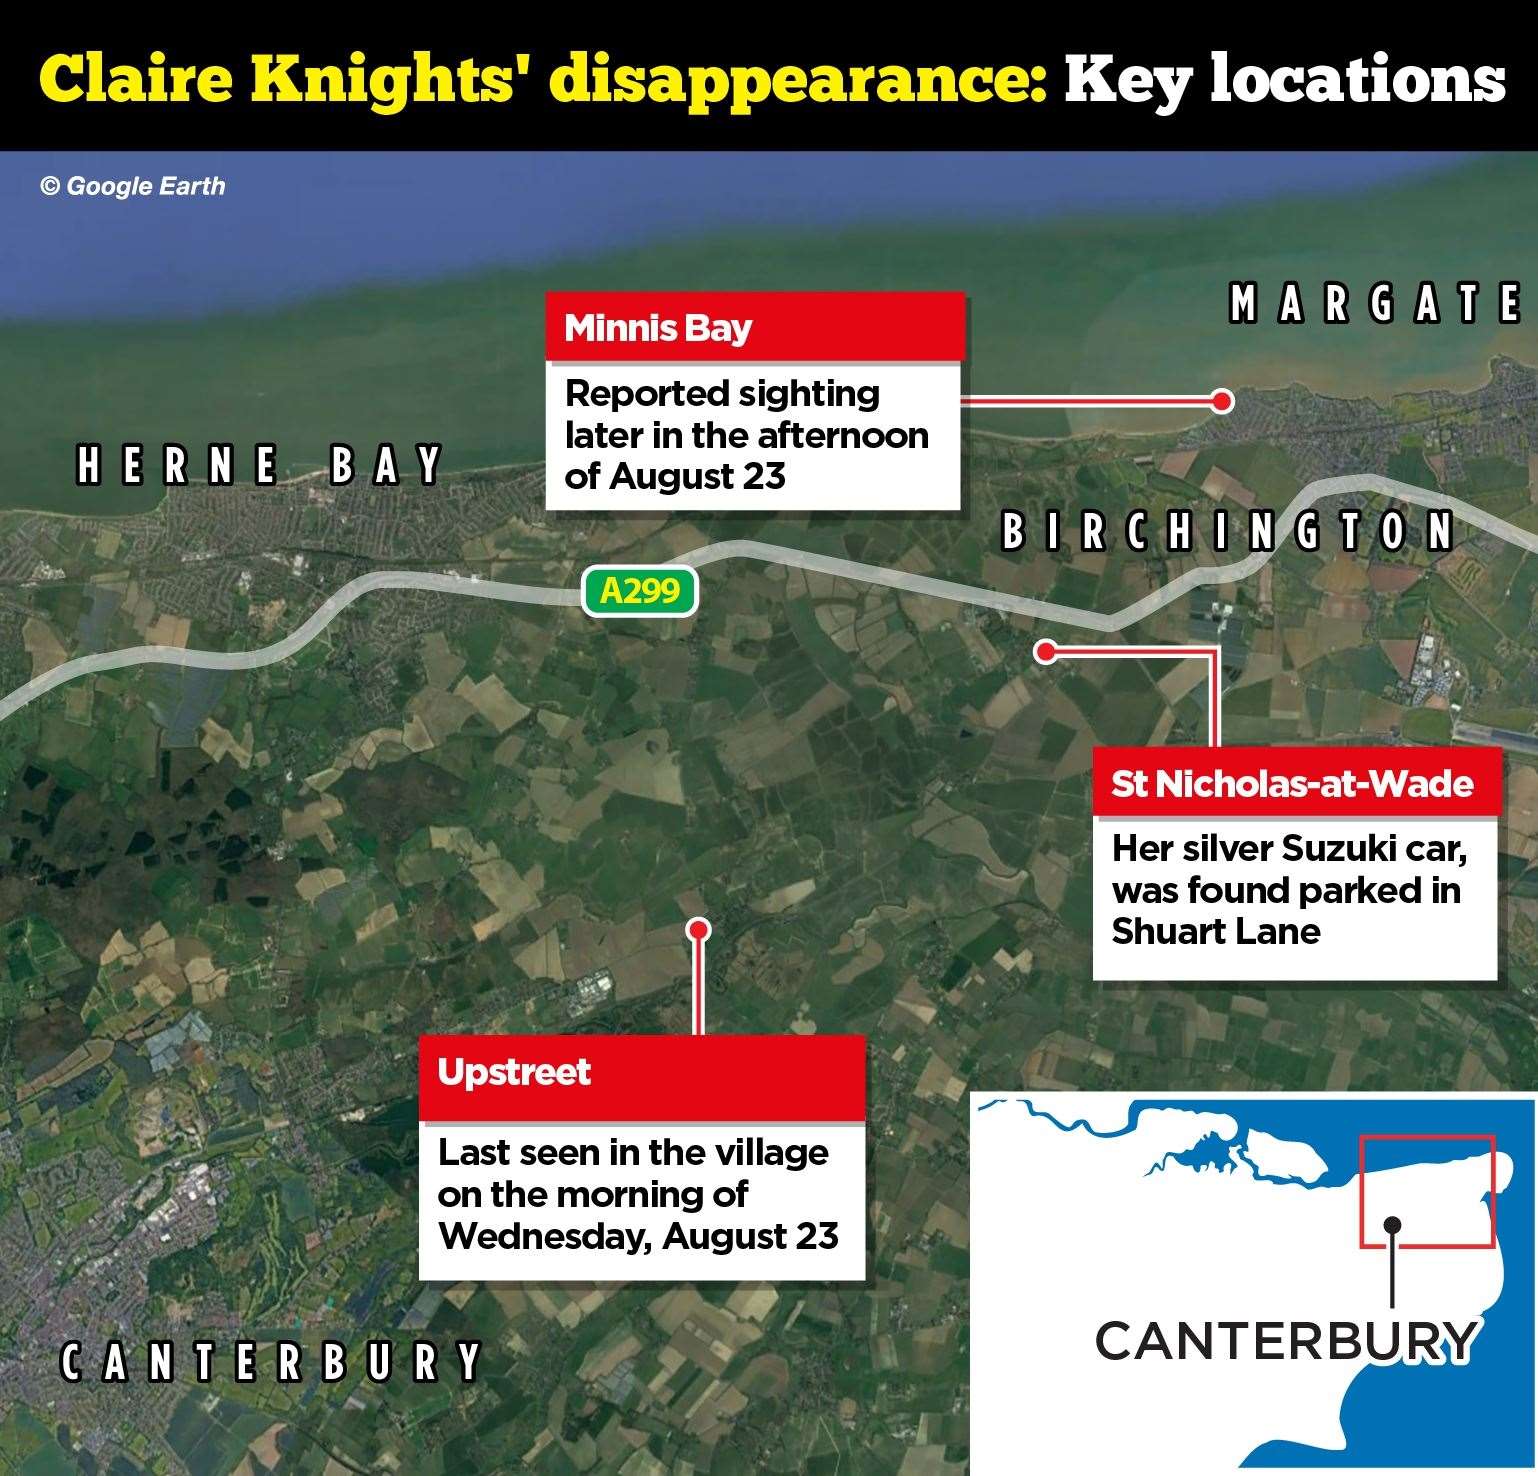 The key locations currently known in the disappearance of Claire Knights